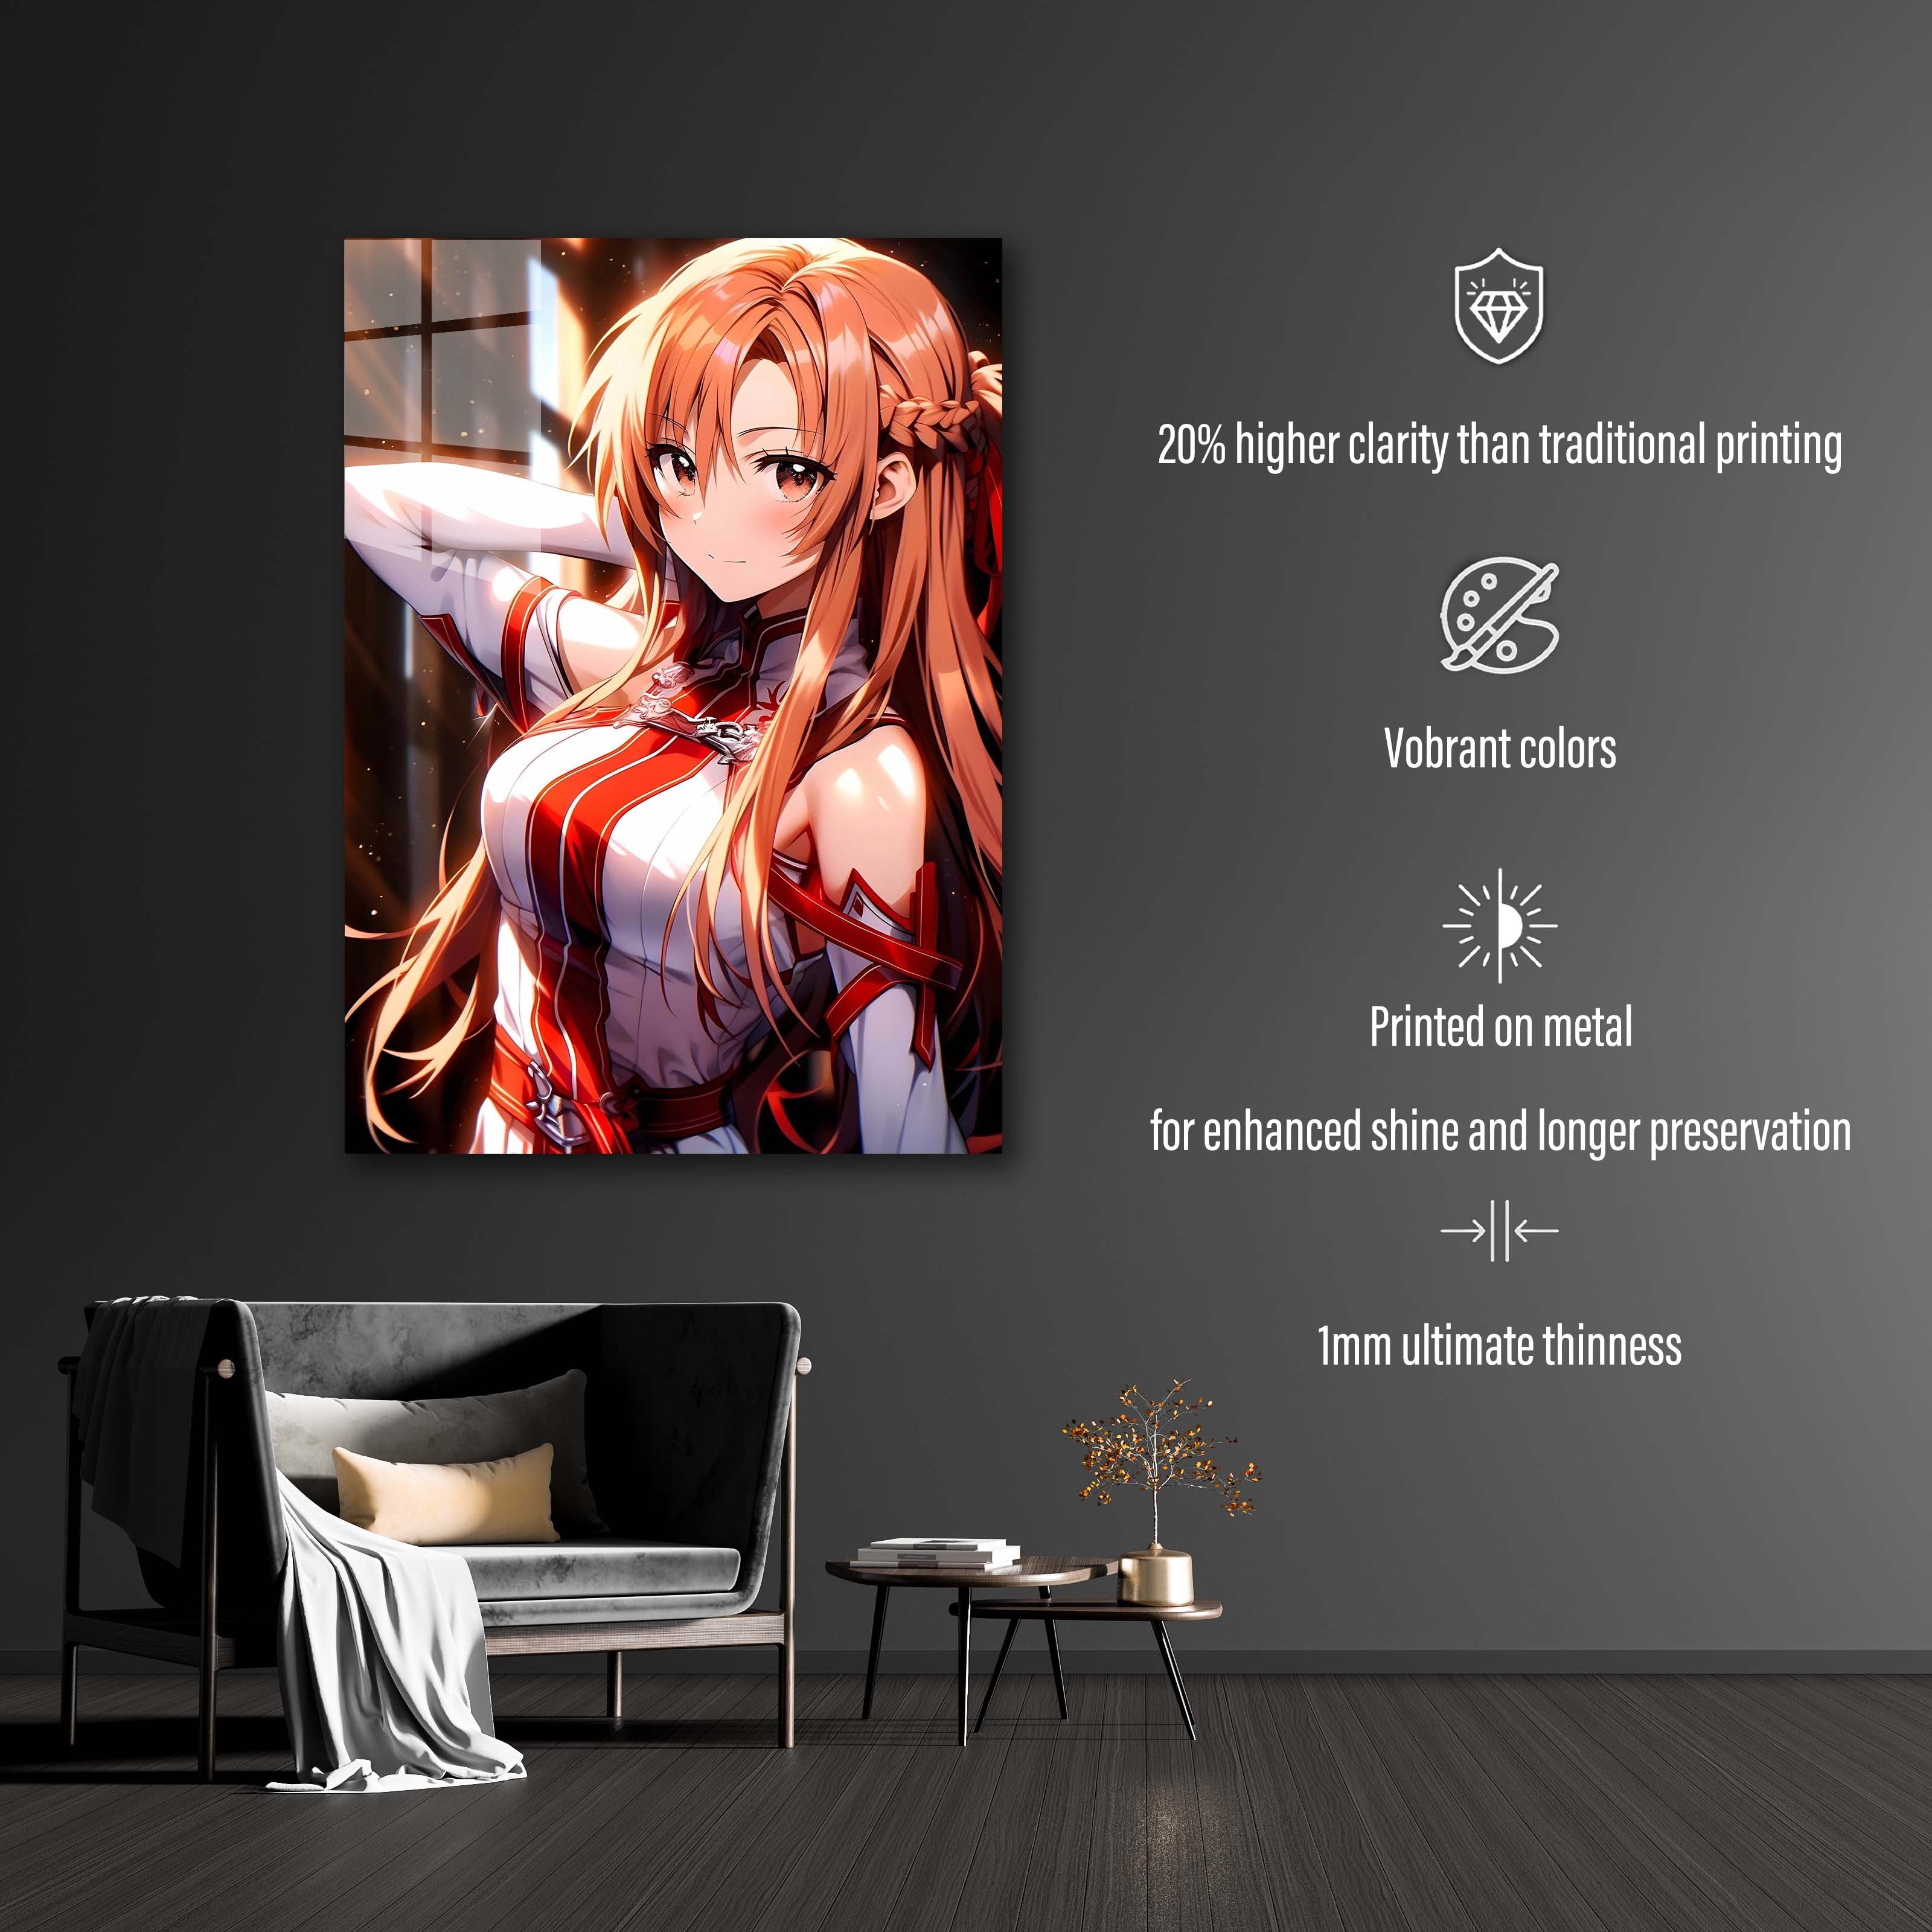 Asuna-designed by @By_Monkai